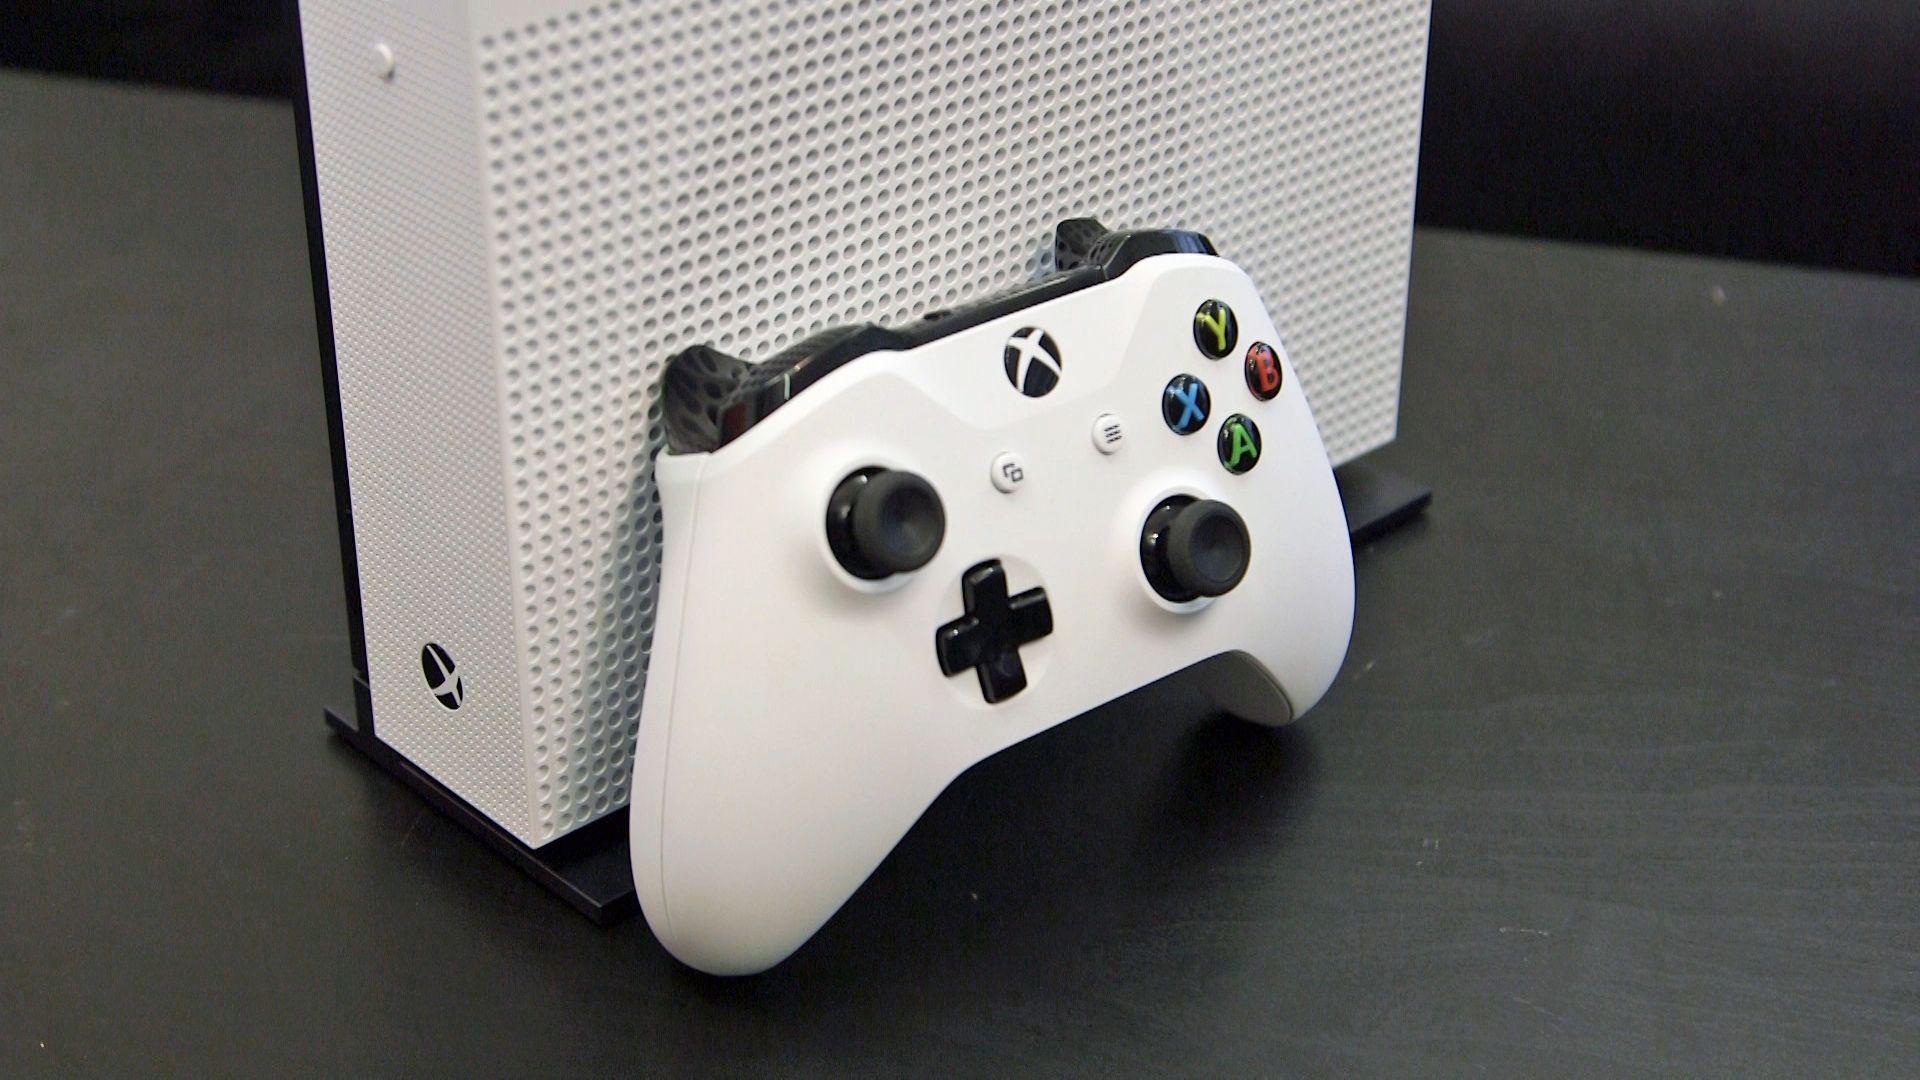 Xbox One sales have shot up 1000% in the UK